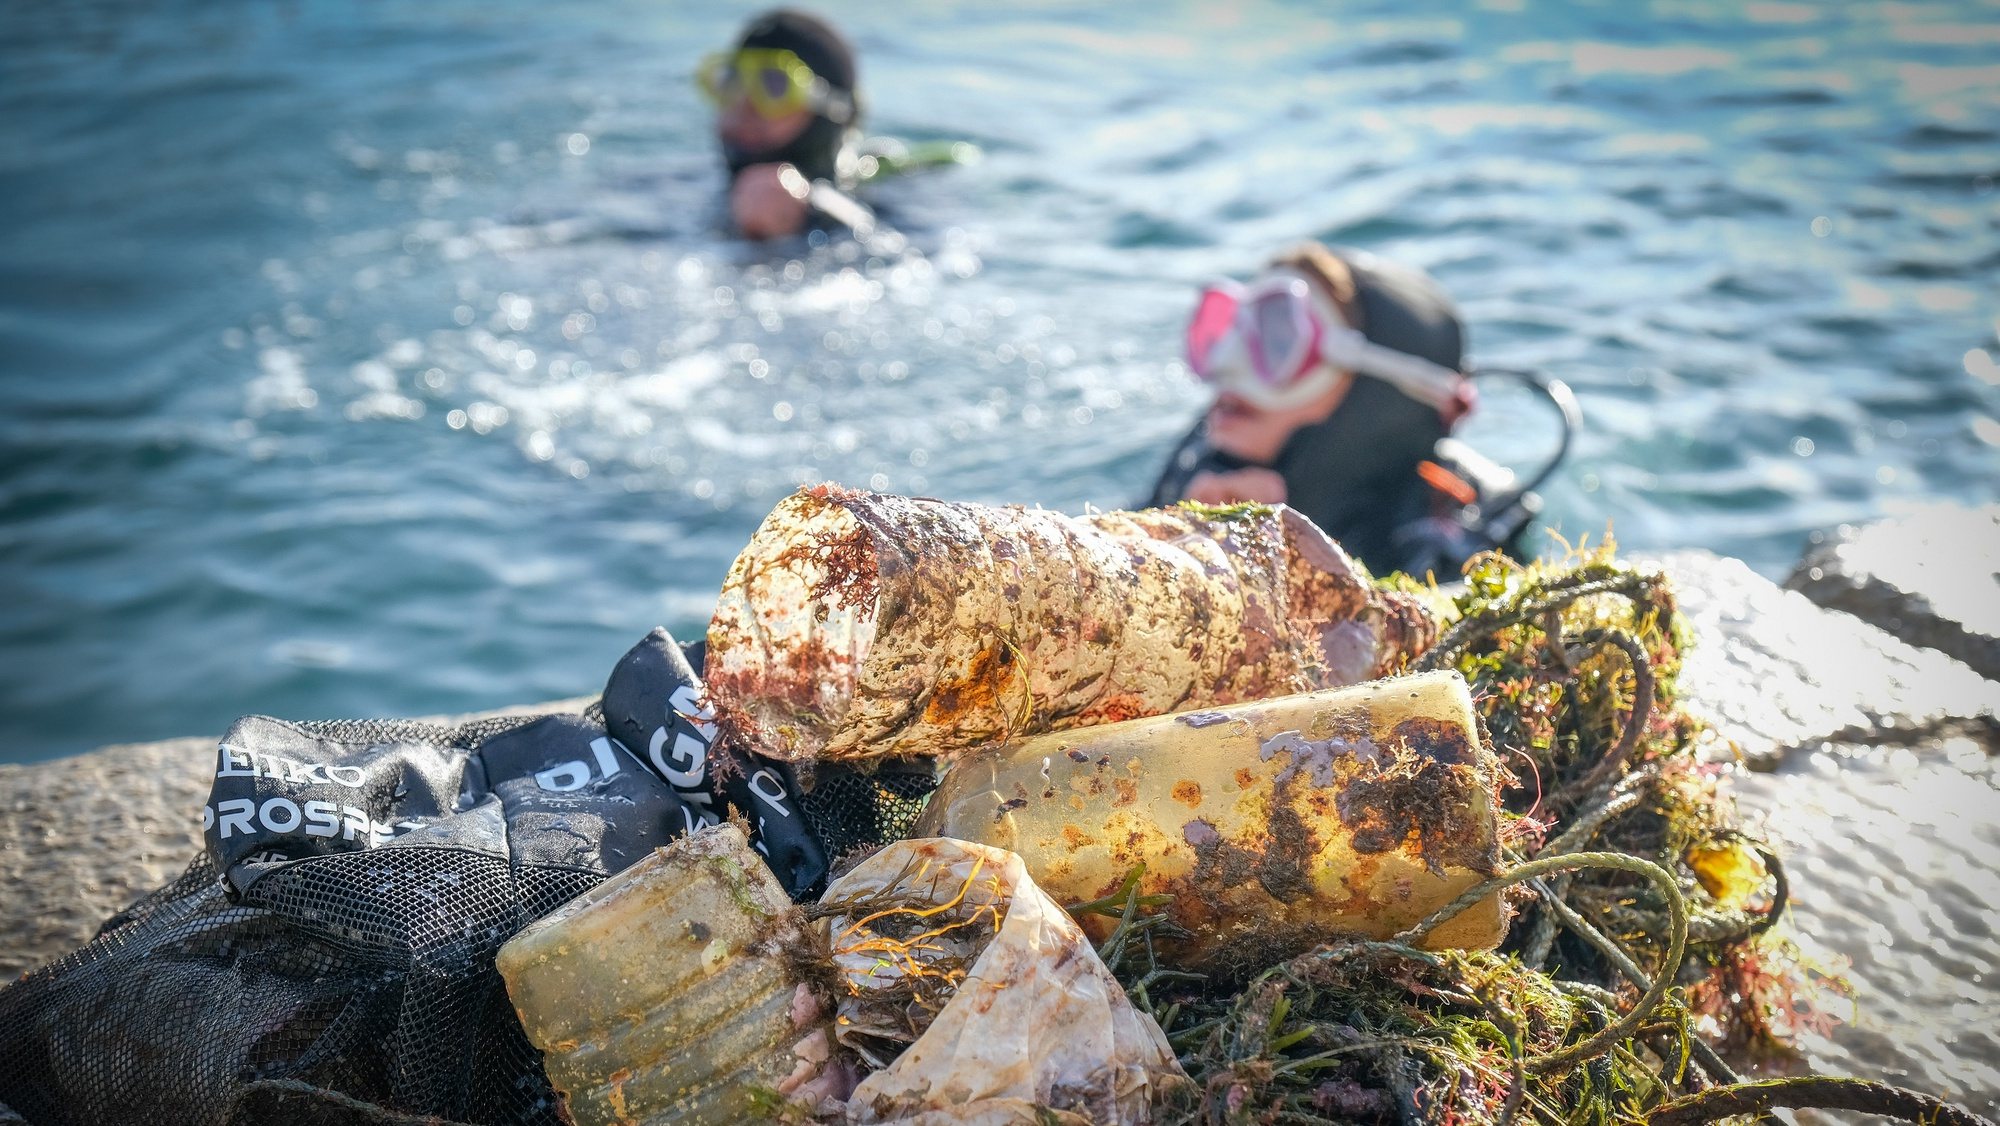 Trash collected by divers during an aquatic cleaning action with participants from all over the world to break the Guinness World Records record, promoted by the Oceanum Liberandum association, in Sesimbra, Portugal, 24 September 2022. The initiative aims to reinforce the importance of actions to protect marine life and combat climate change. RUI MINDERICO/LUSA